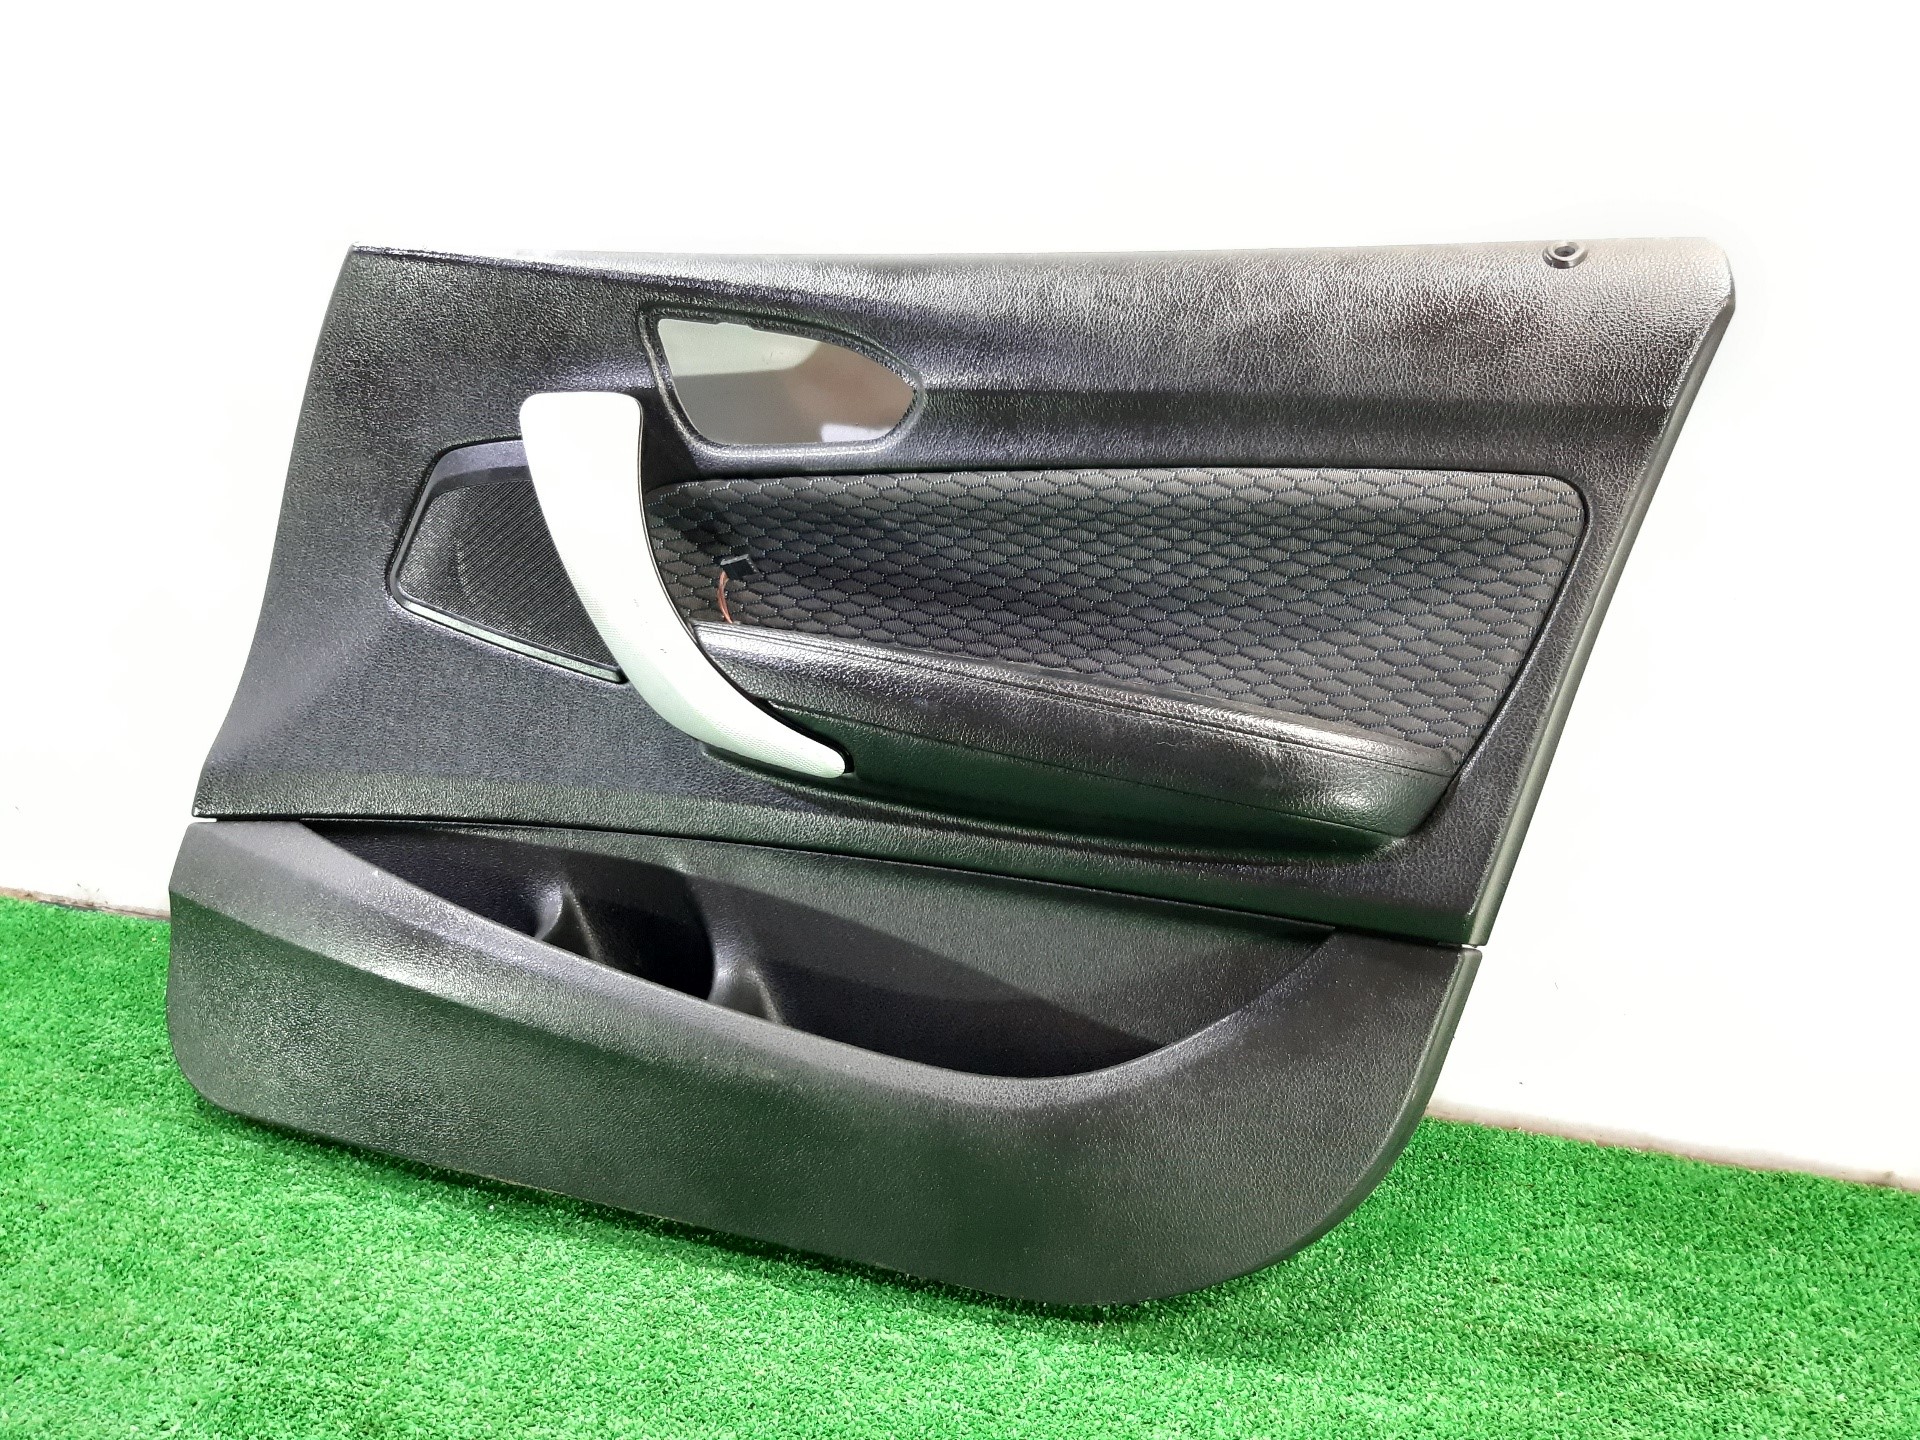 BMW 1 Series F20/F21 (2011-2020) Front Right Door Panel 77762121F20VR1 25368247